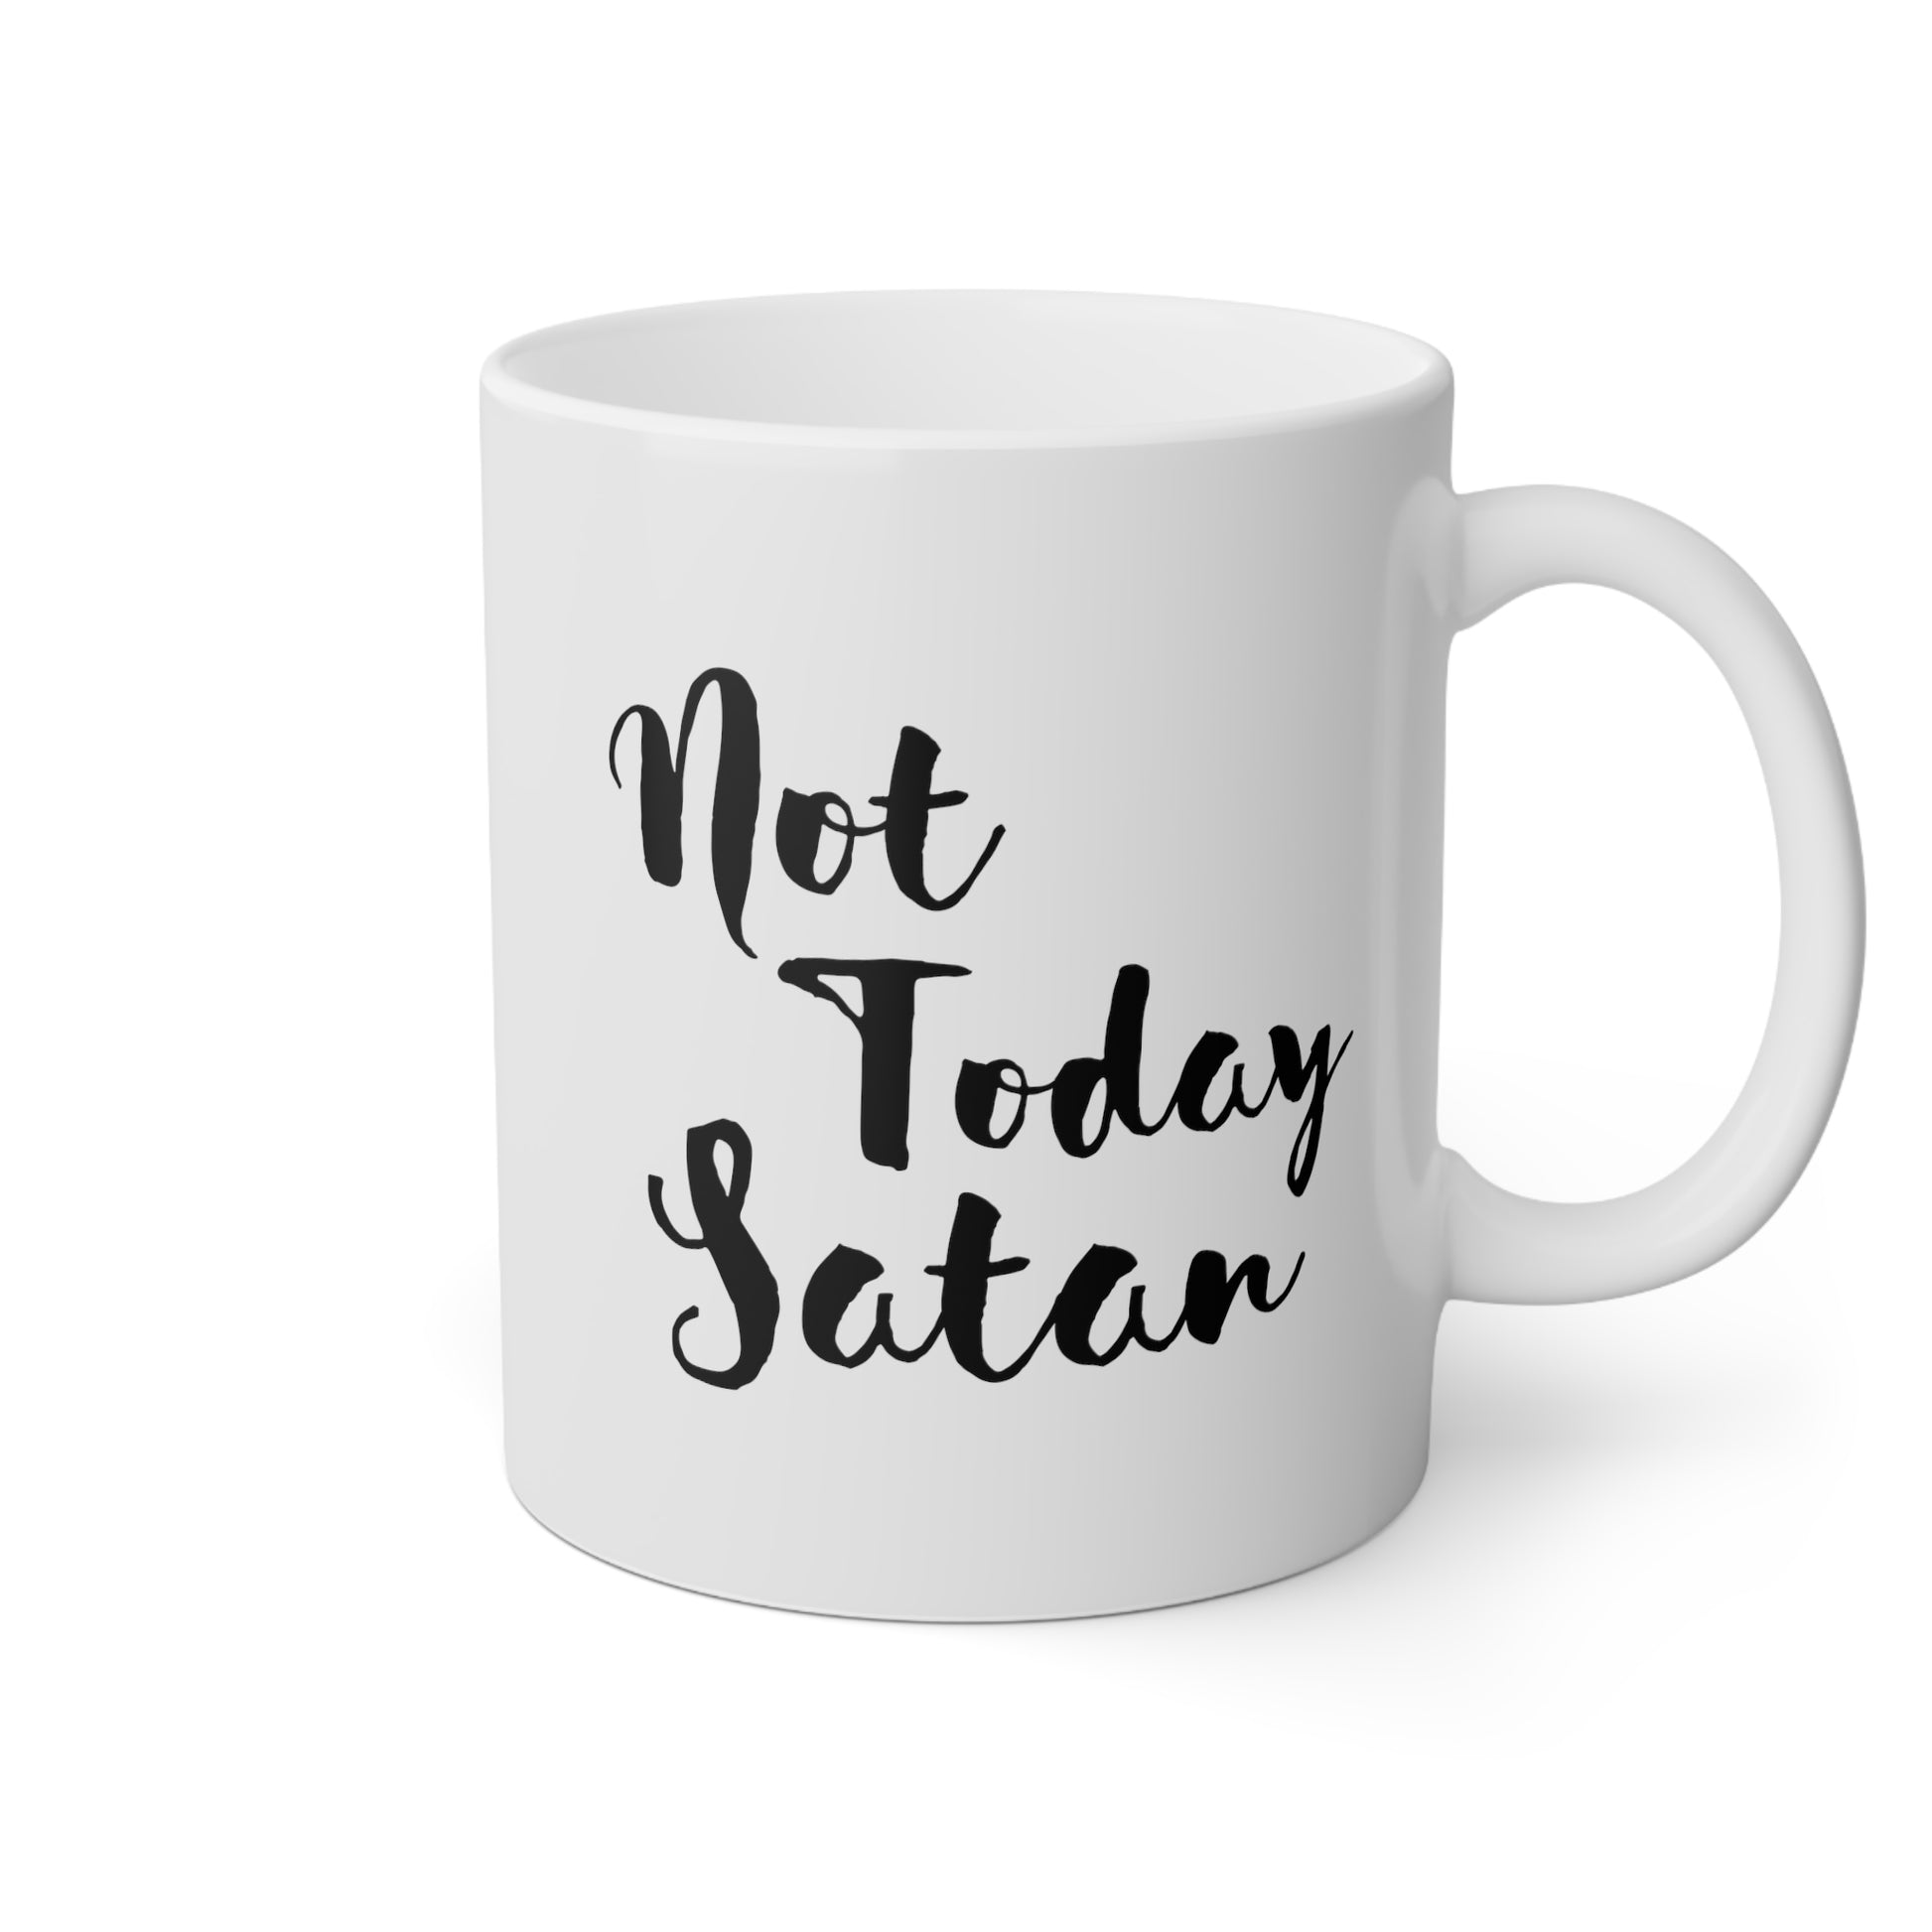 Not Today Satan 11oz white funny large coffee mug gift for christian quote religious with saying love God waveywares wavey wares wavywares wavy wares